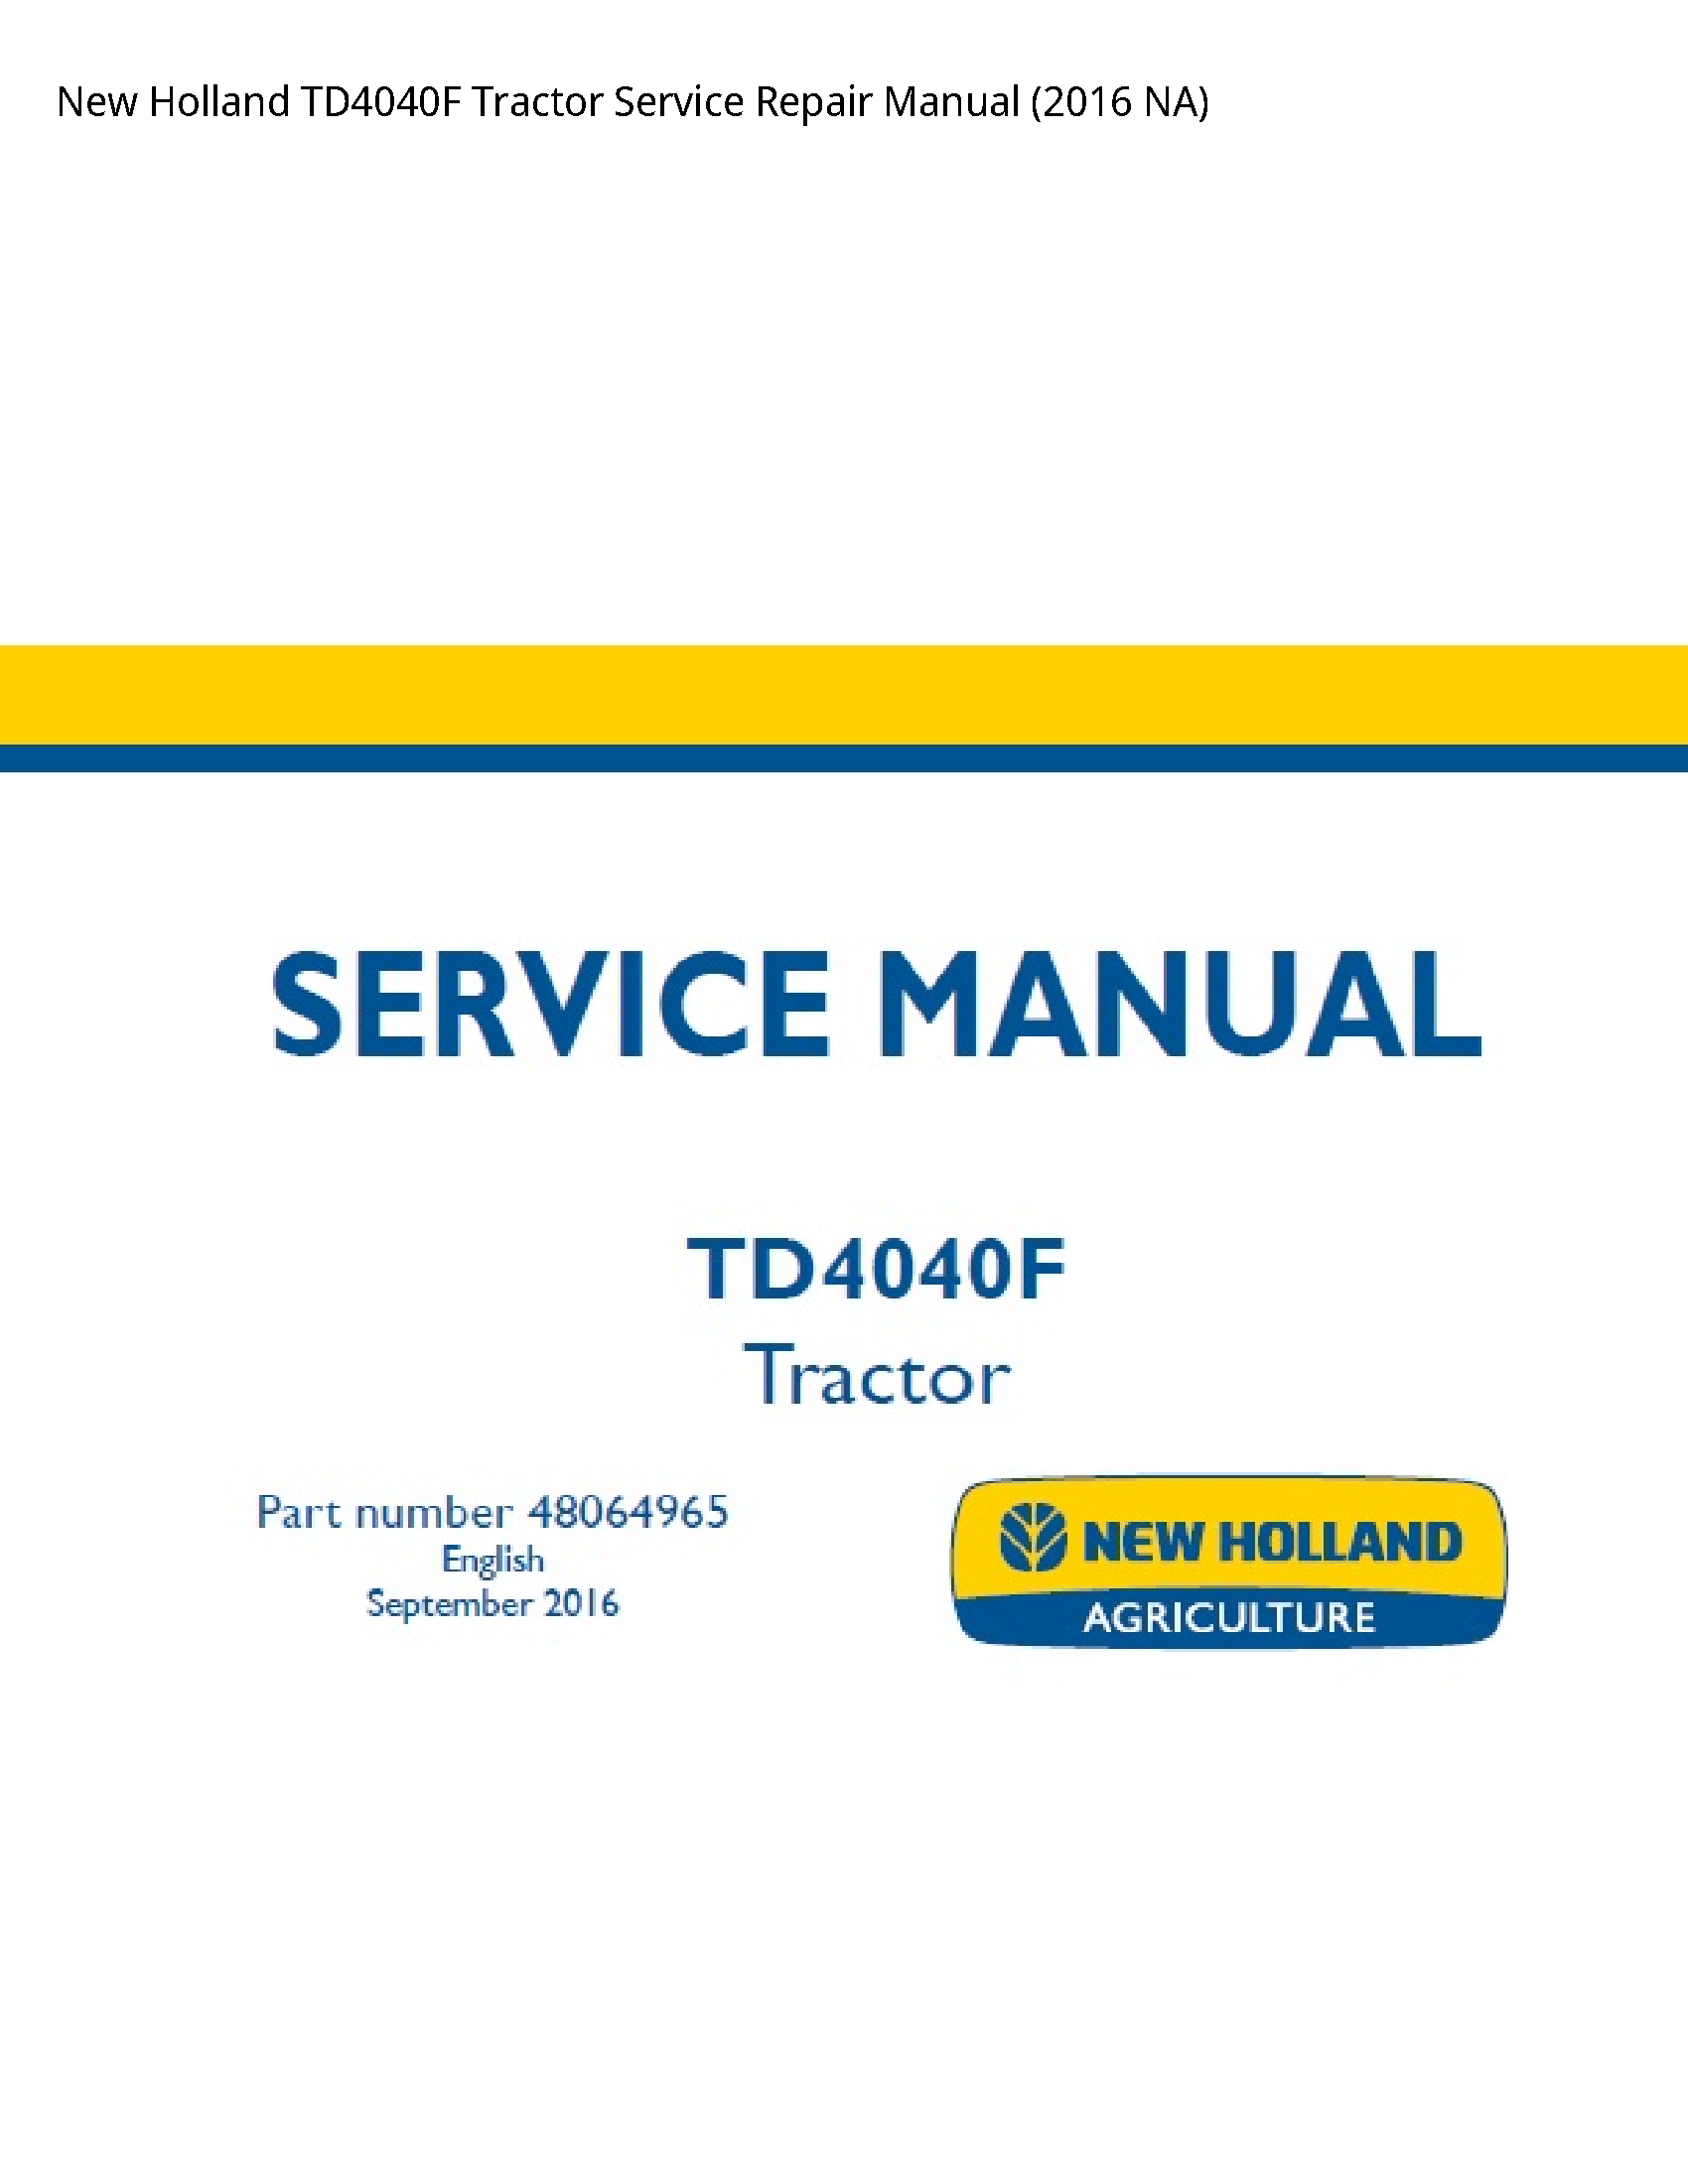 New Holland TD4040F Tractor manual